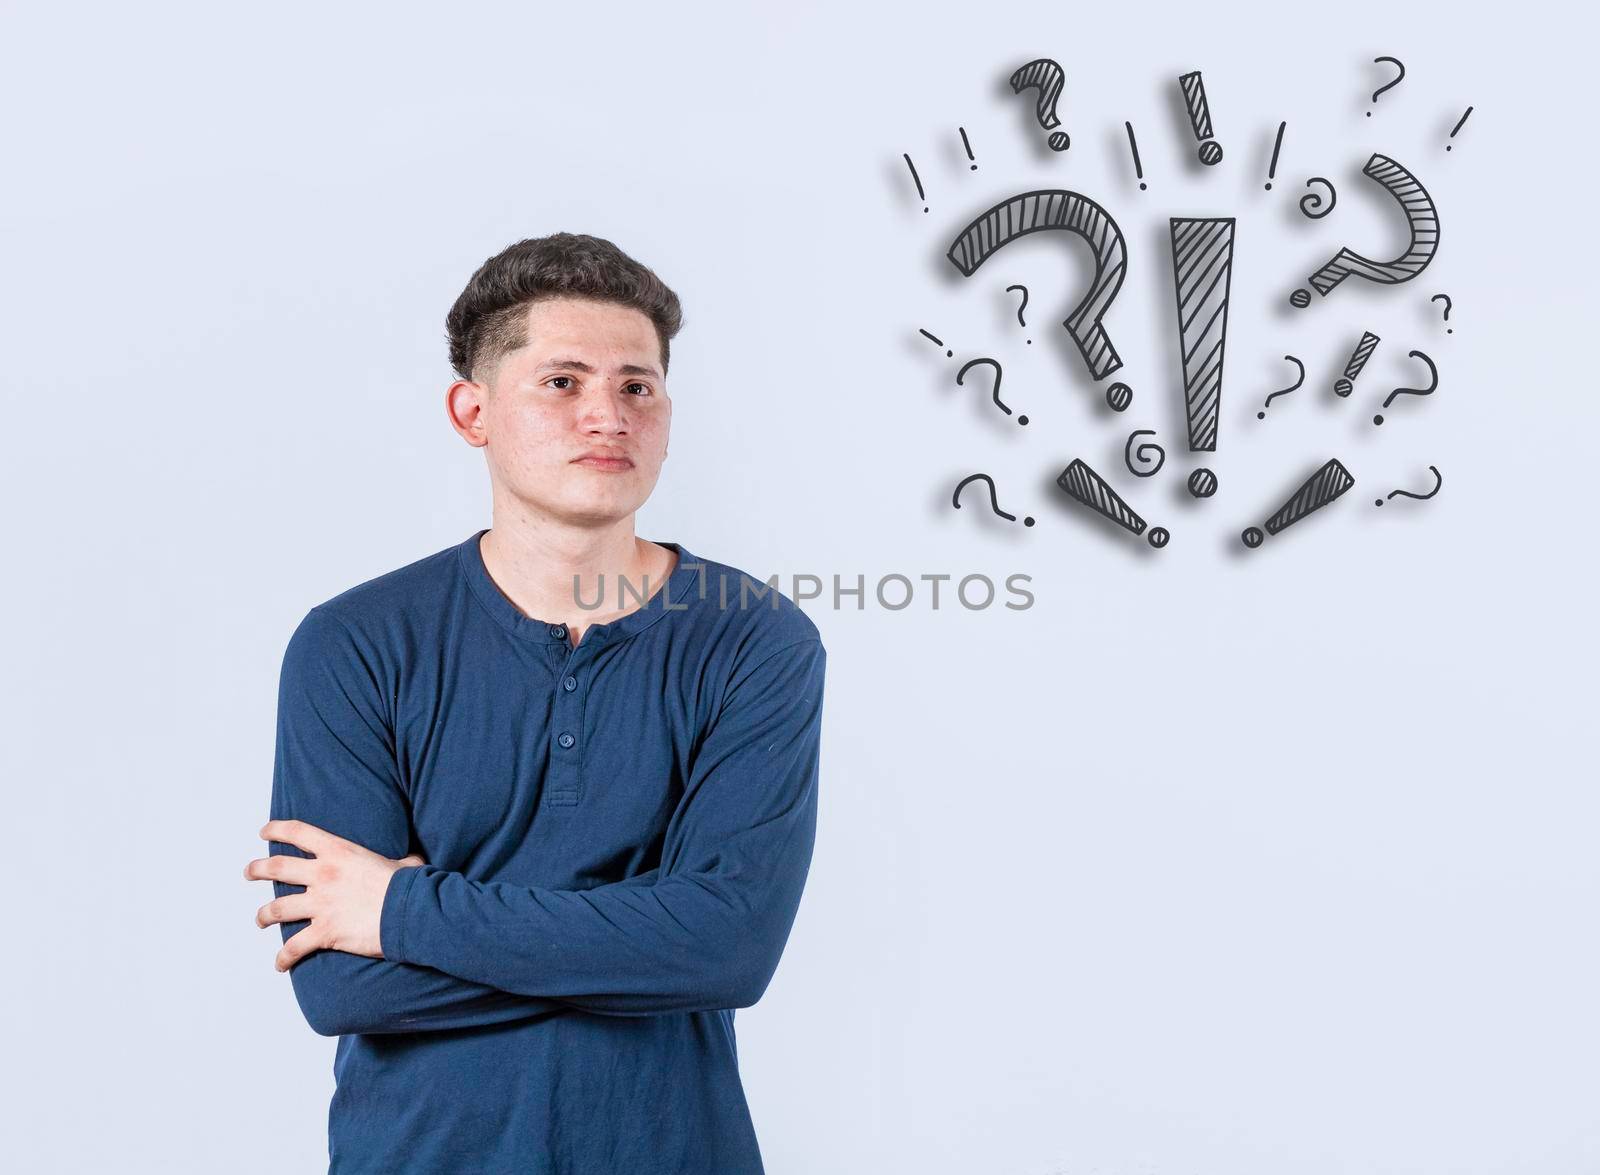 Thoughtful young man looking up with exclamation marks, Thoughtful man with exclamation marks on isolated background, Indecisive man looking up , Concept of man asking with exclamation marks by isaiphoto